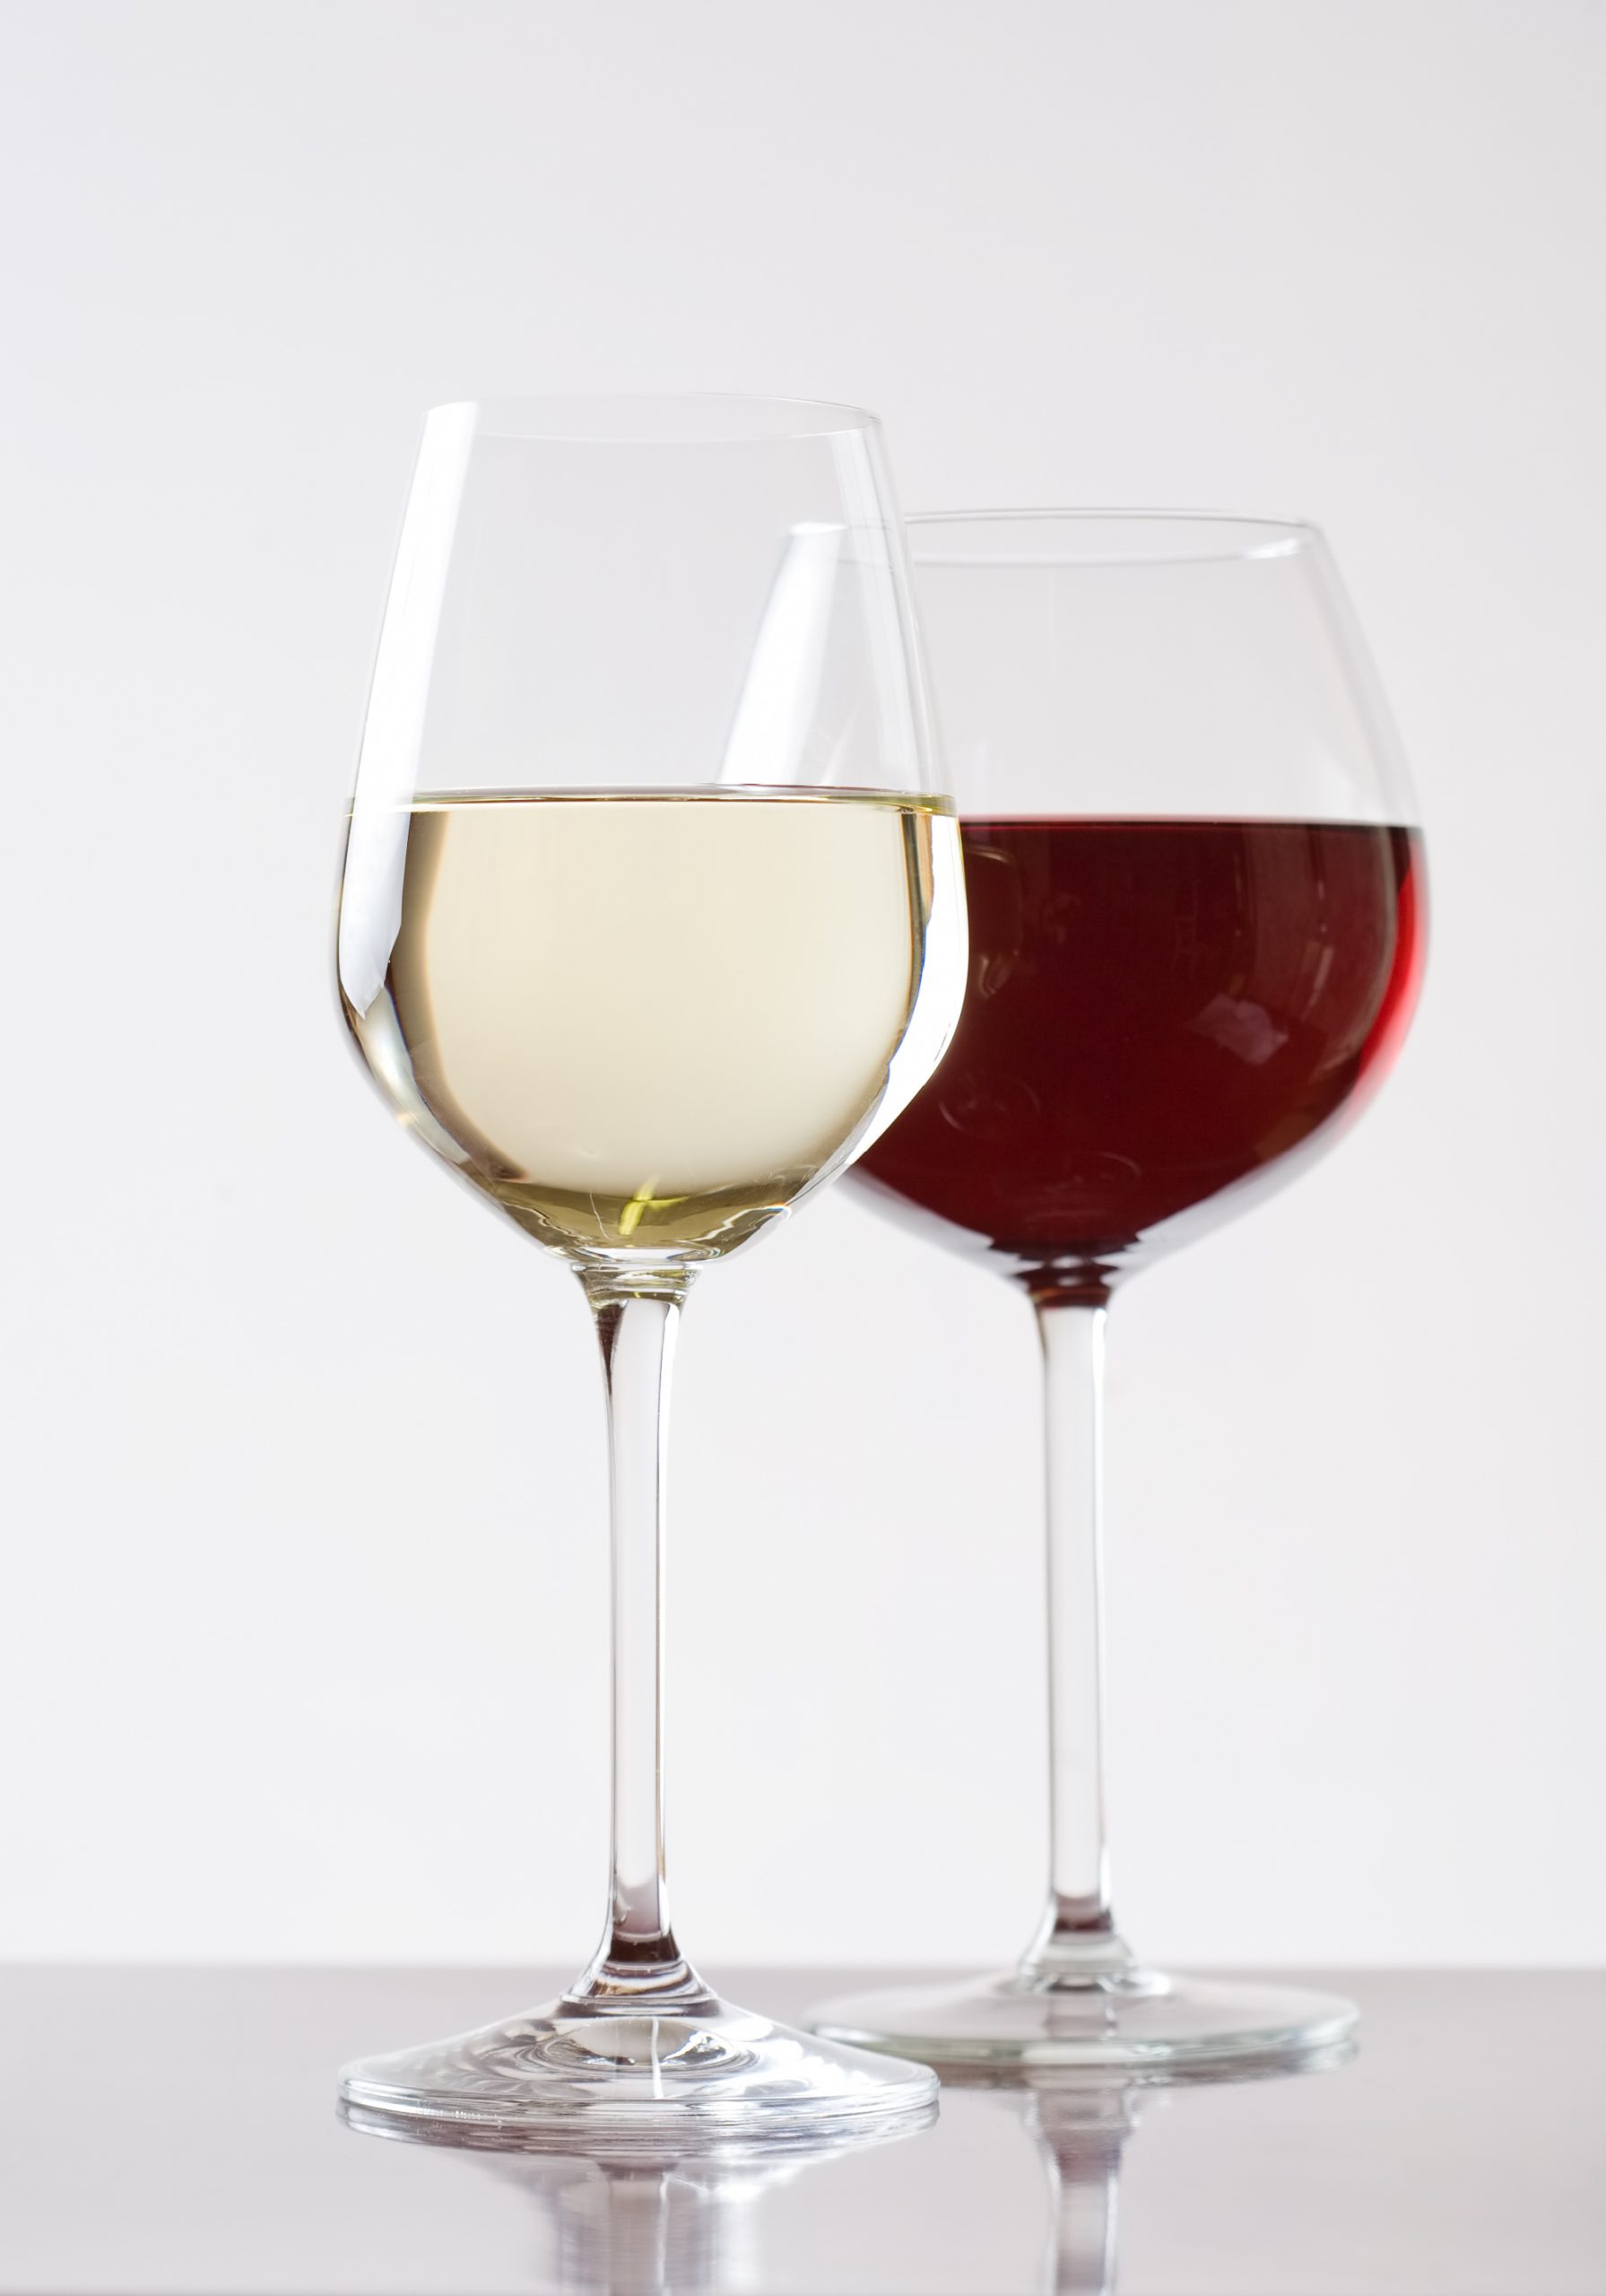 Two glasses of wine on a table with a white background.